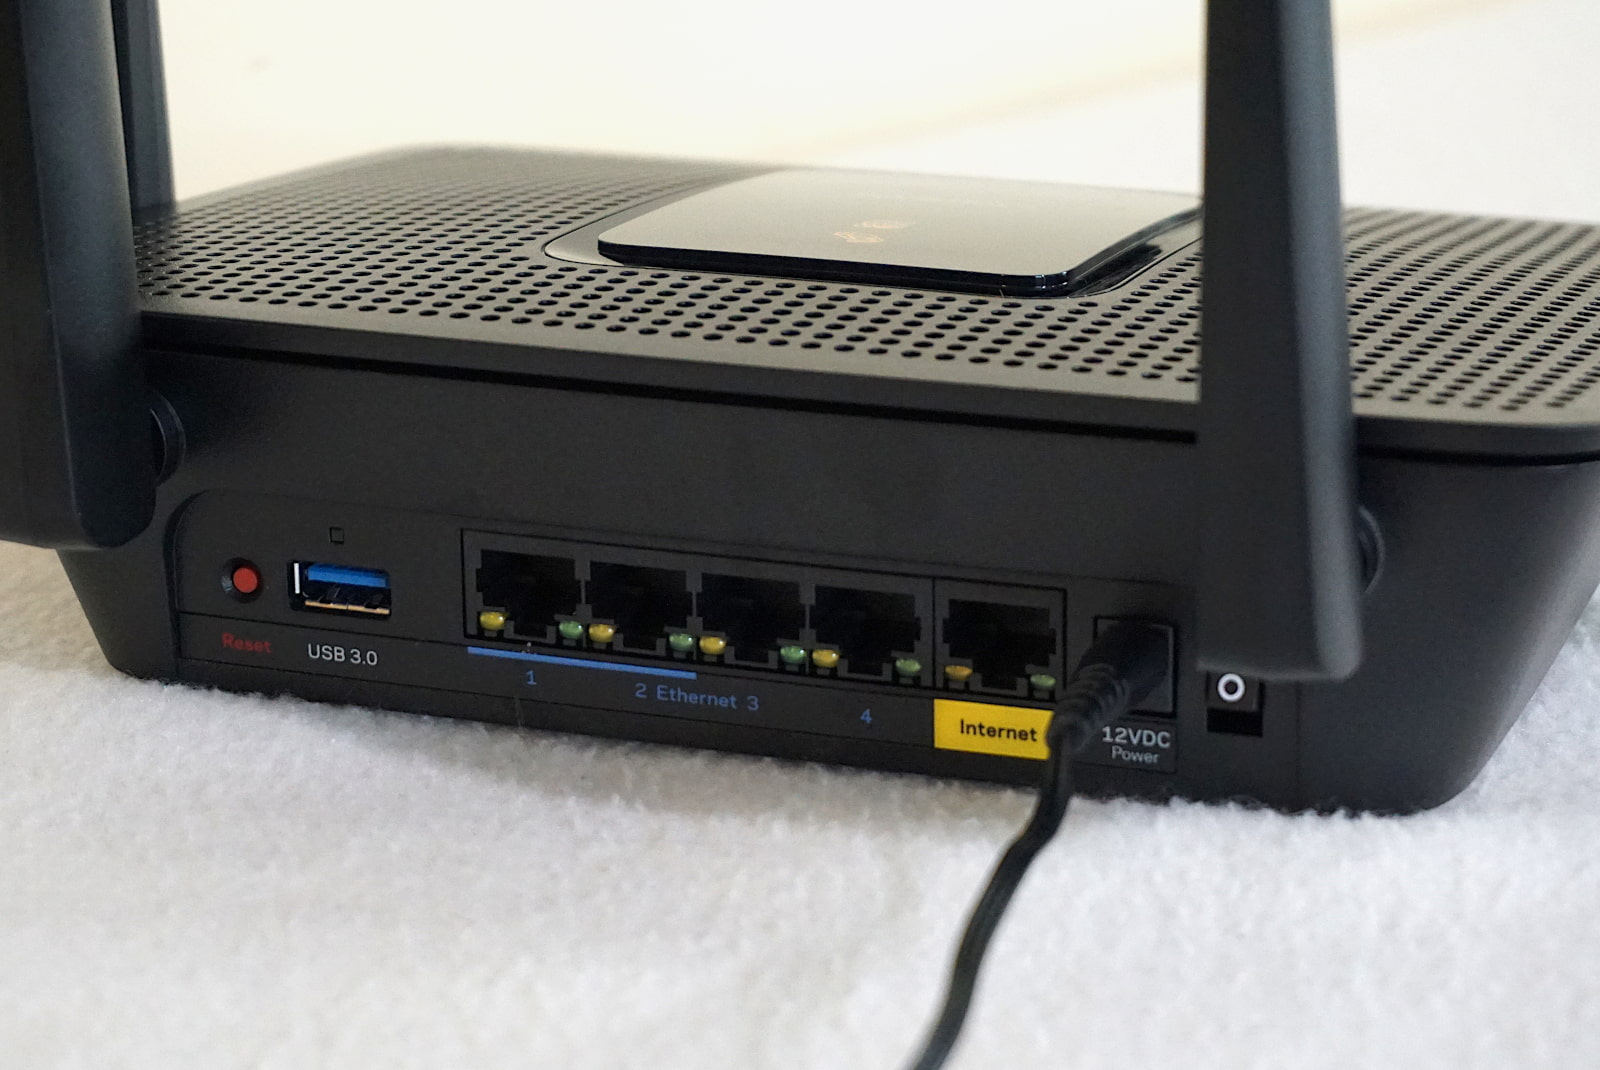 Rear of Linksys EA8300 router showing ethernet ports and USB port